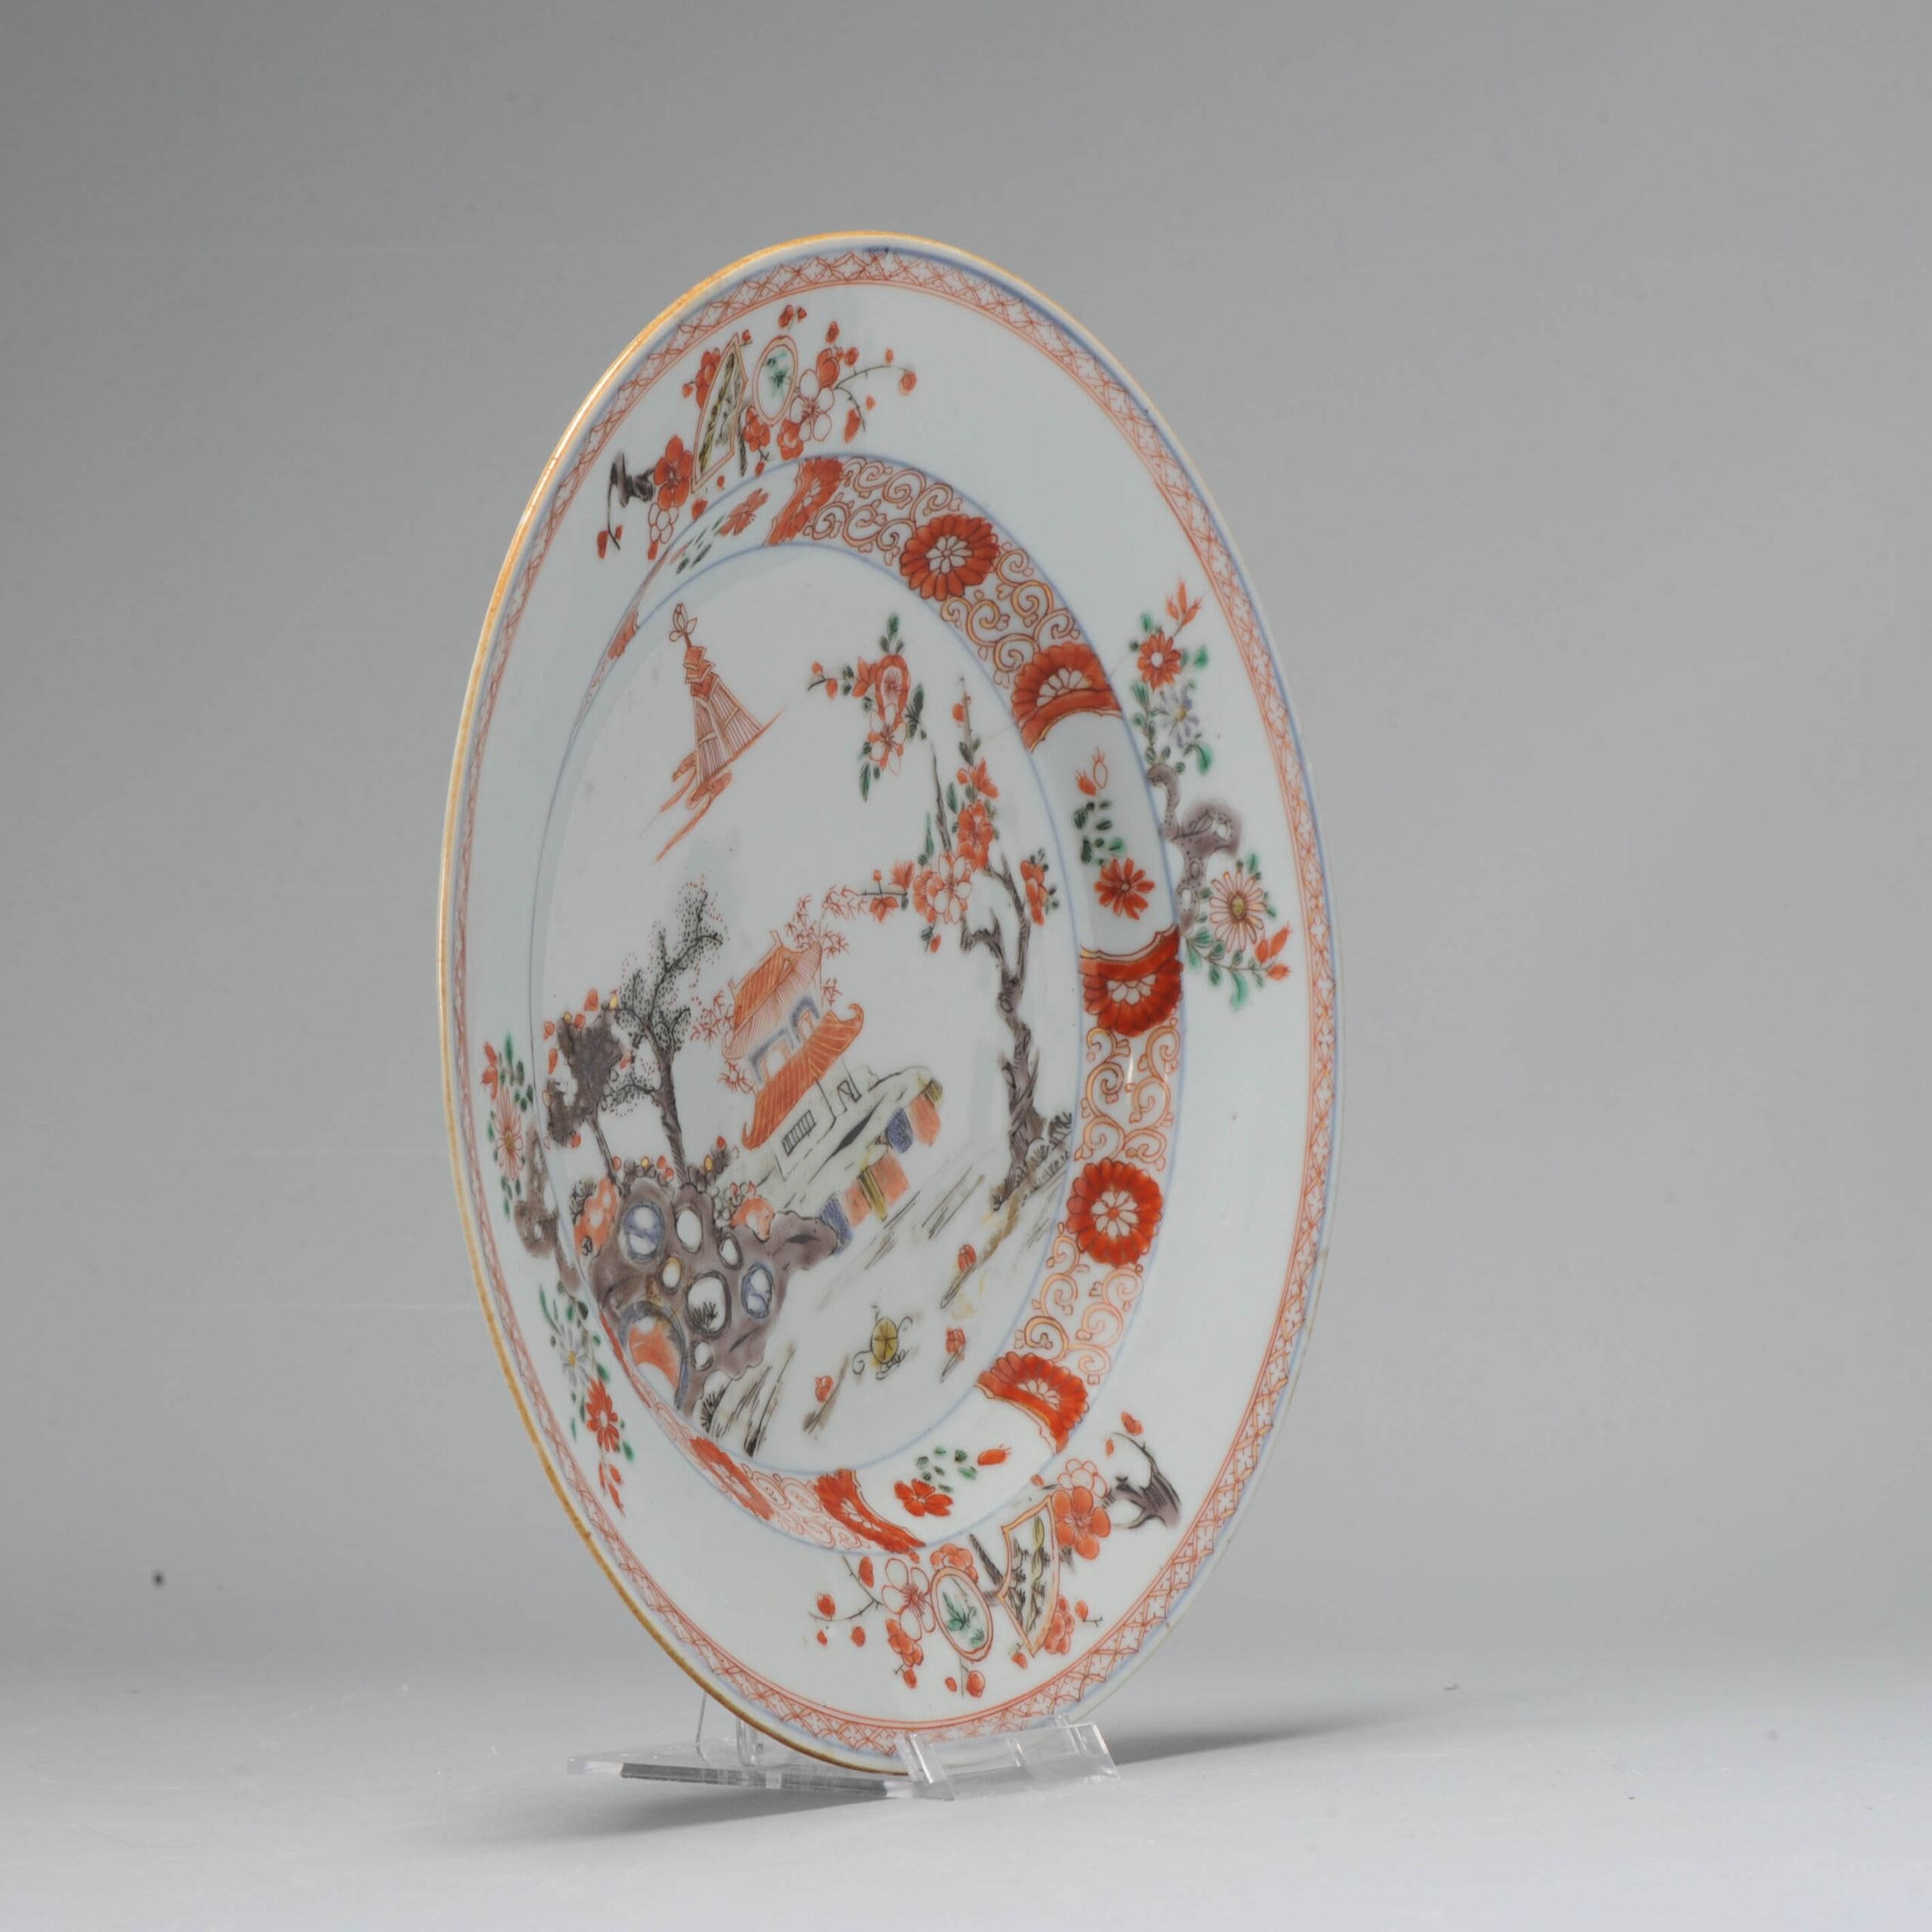 Decorated in various colours with a landscape scene. Typical plate for the period around 1720-1730 when the potter in Jingdezhen mastered all types of decorations and started combining them at will. From Doucai to Rouge the Fer. A very interesting